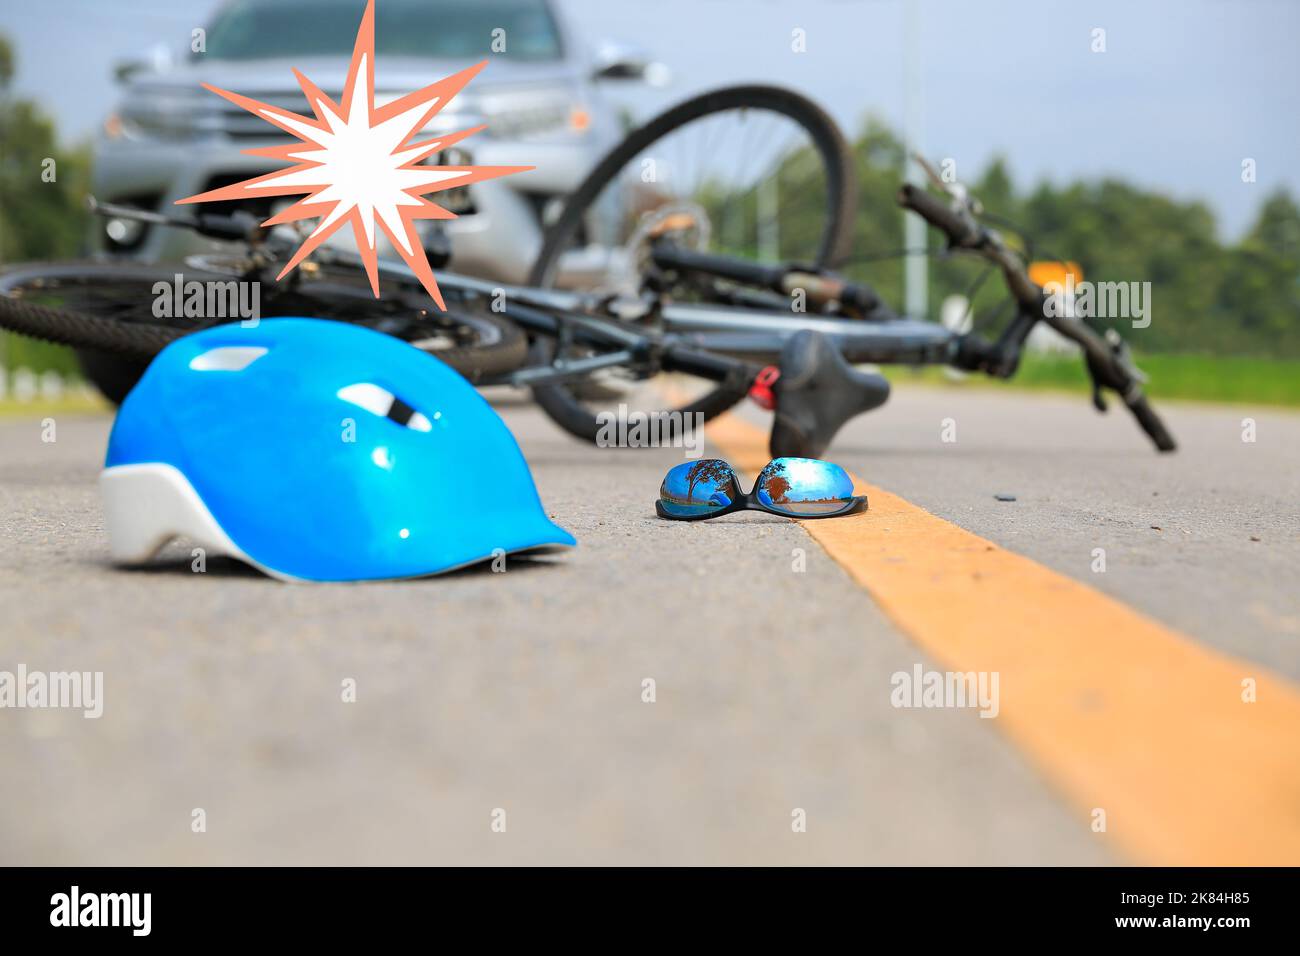 Accident car crash with bicycle on road Stock Photo